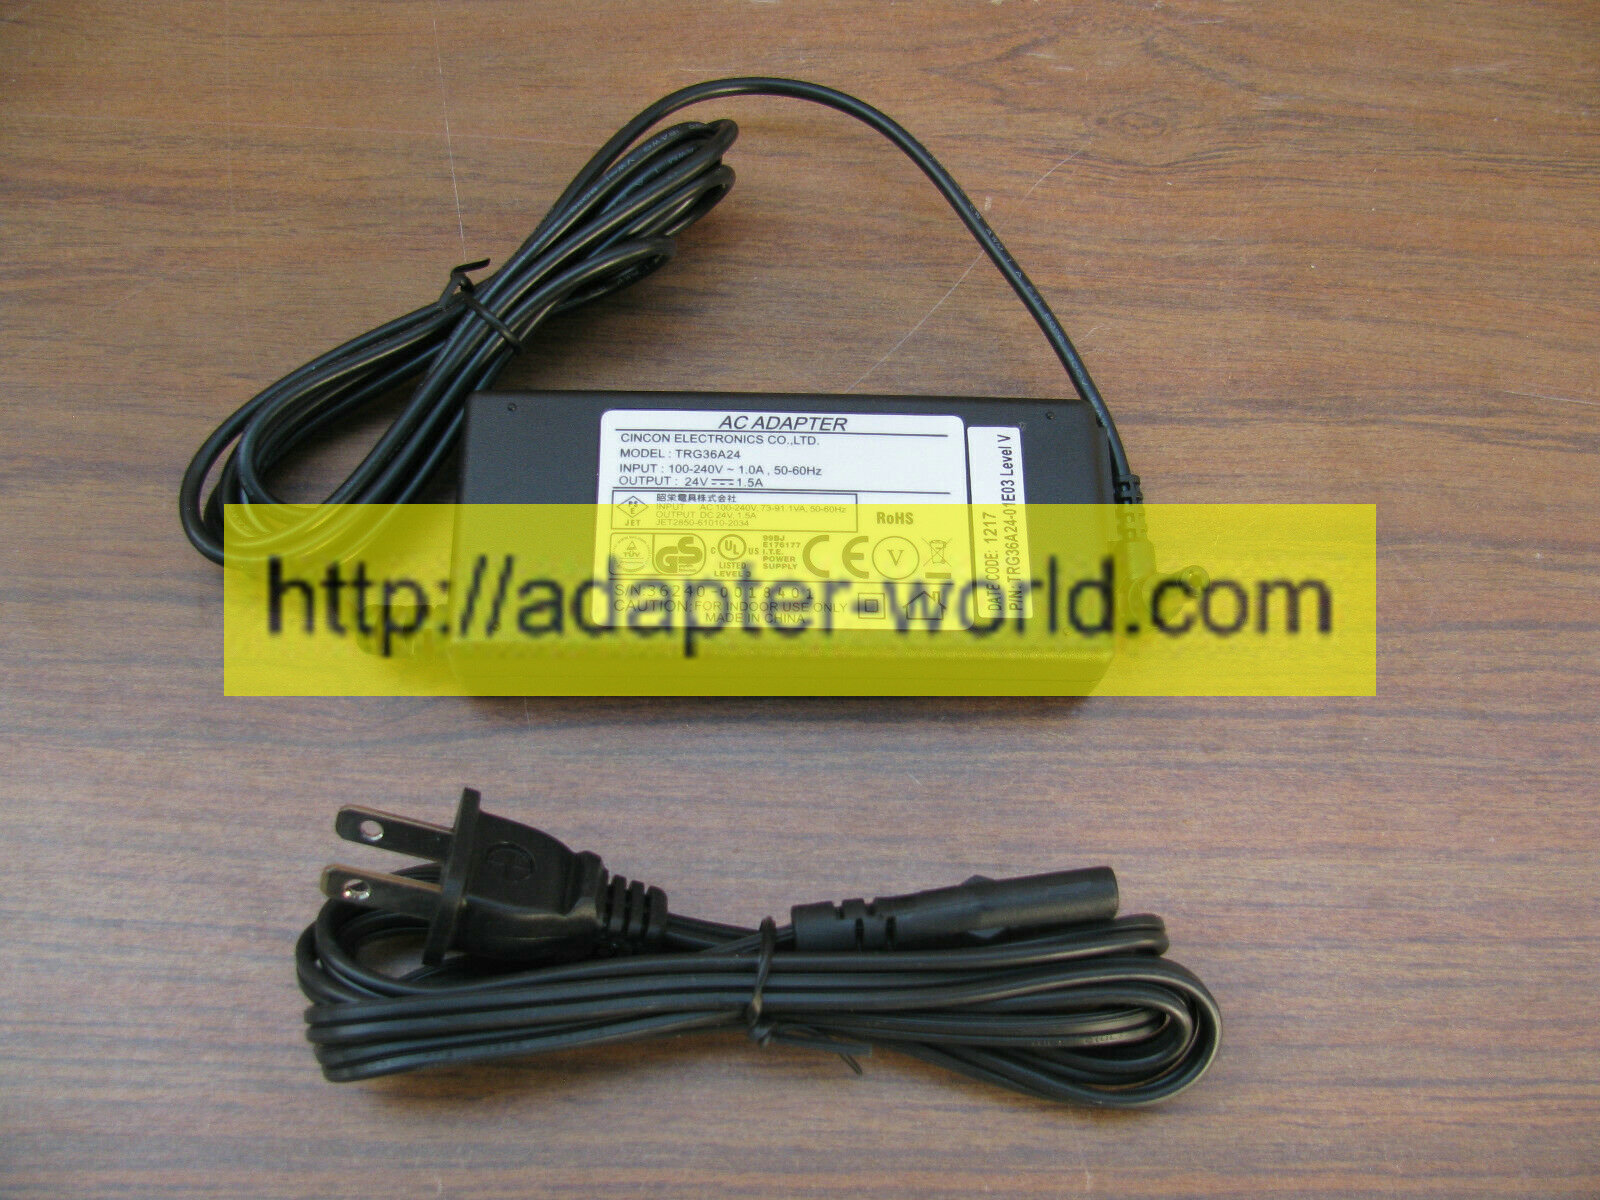 *100% Brand NEW* Cincon TR36A24 JET2850-61010-2034 AC Adapter 24V 1.5A ITE Power Supply Free shipping!